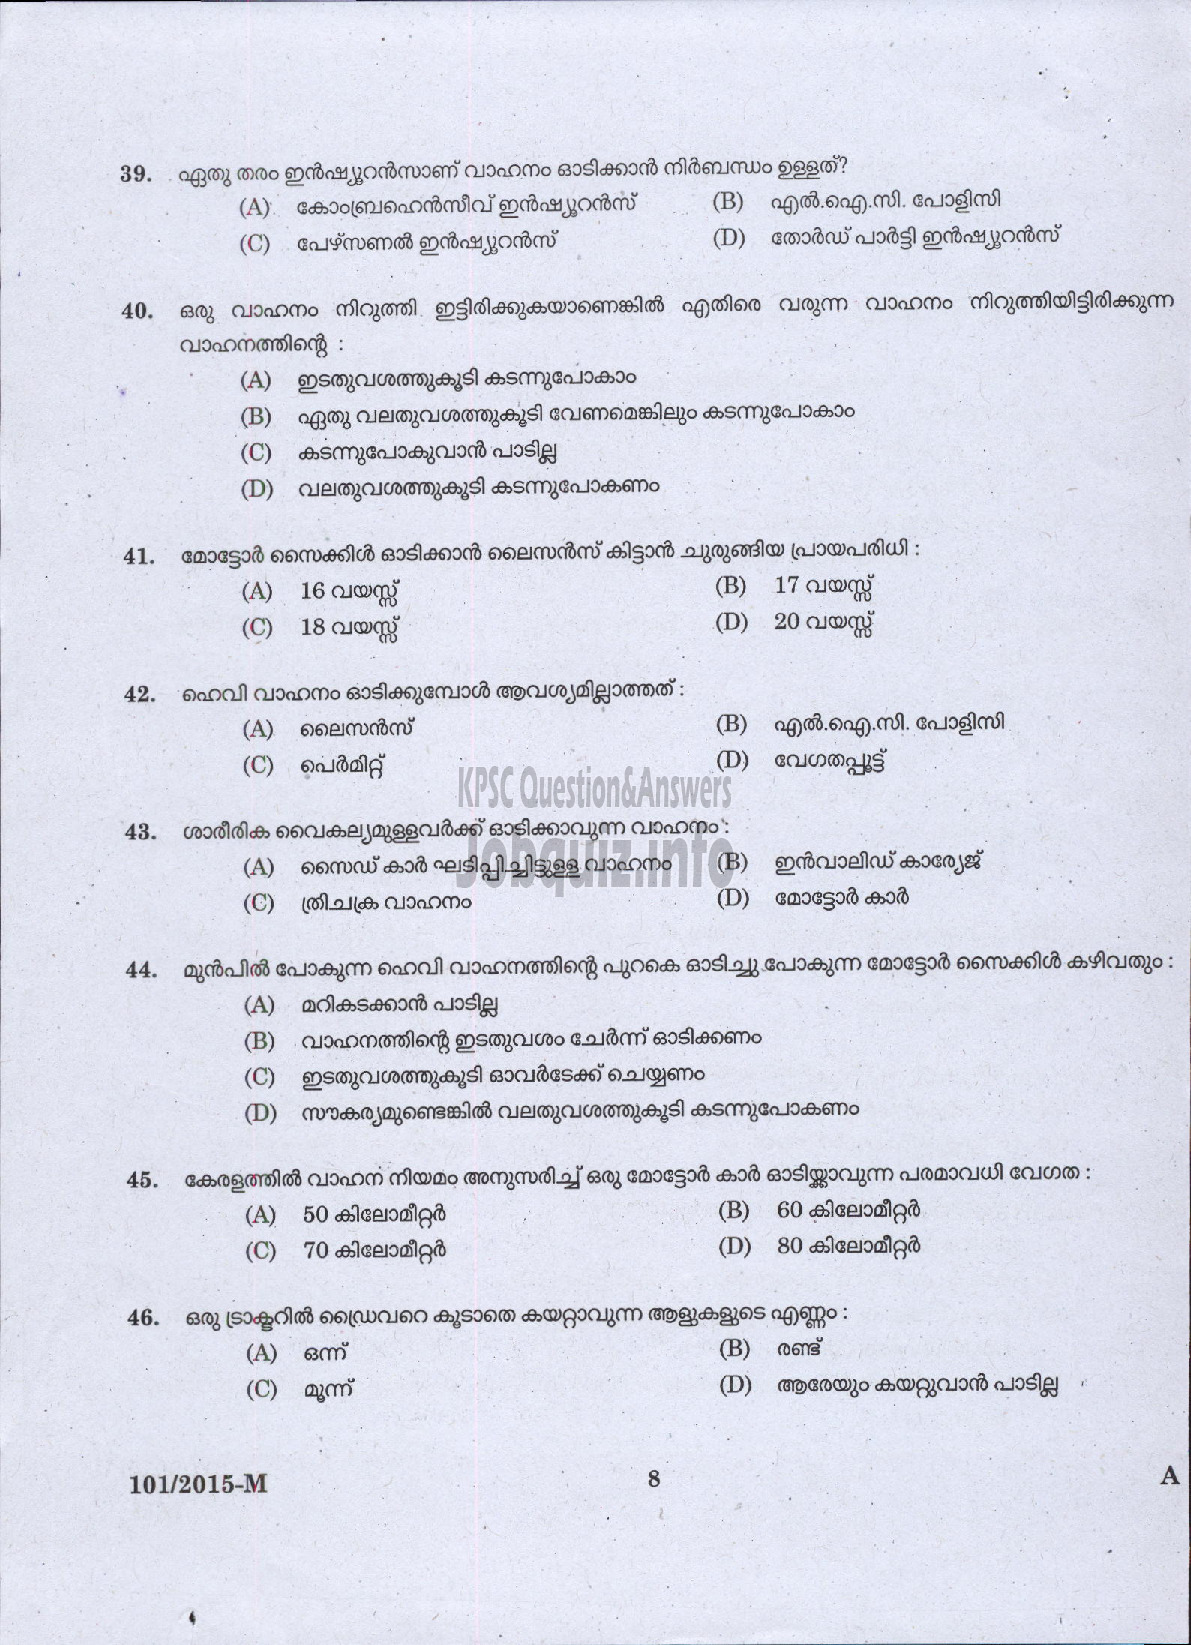 Kerala PSC Question Paper - FIREMAN DRIVER CUM PUMP OPERATOR TRAINEE FIRE AND RESCUE SERVICES ( Malayalam ) -6